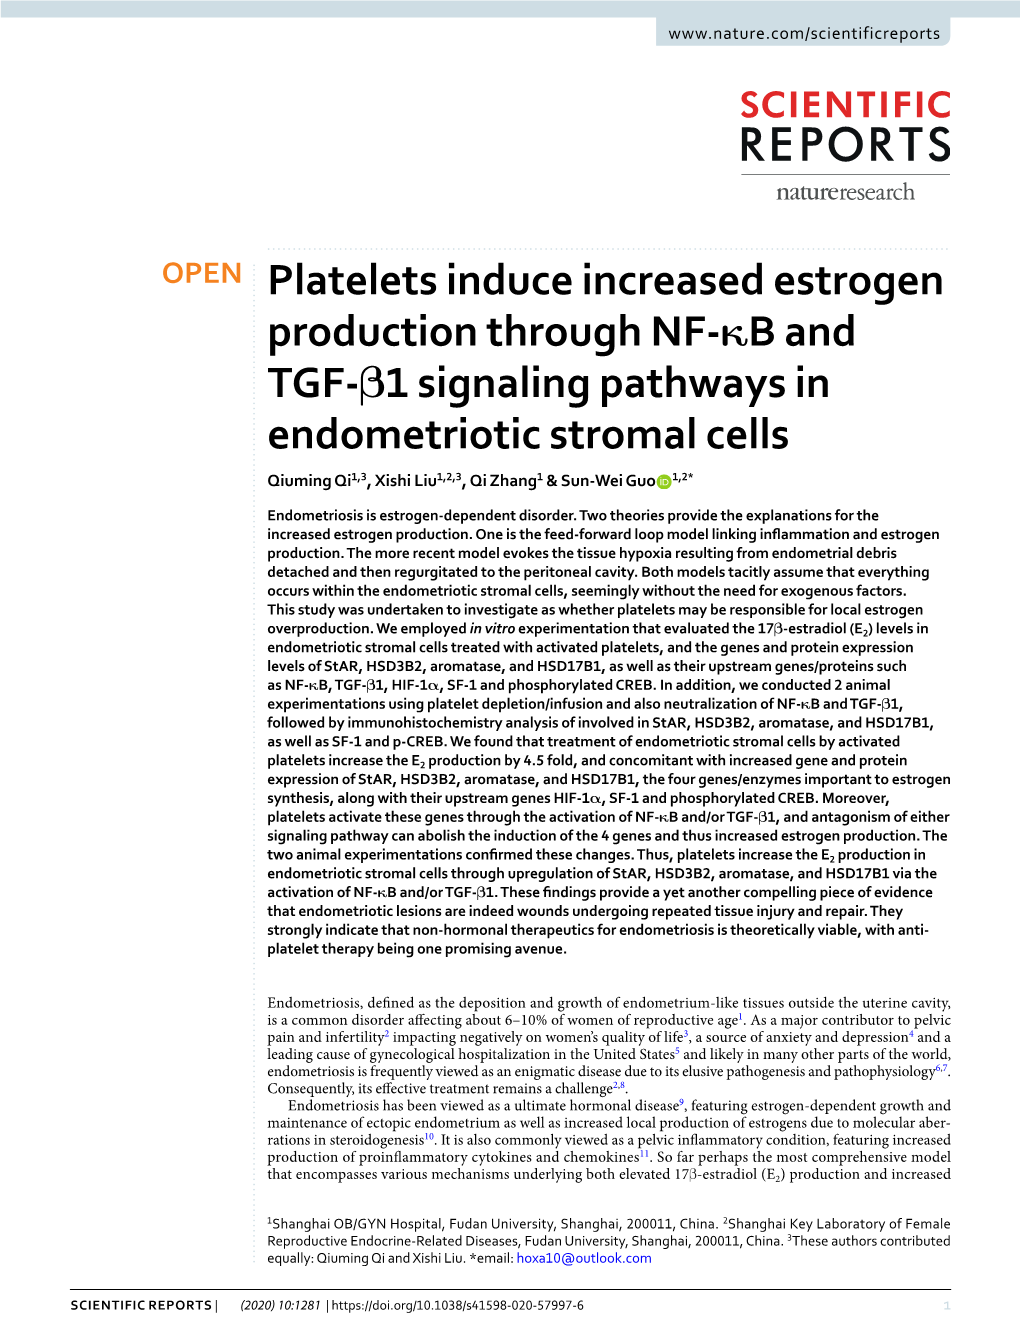 Platelets Induce Increased Estrogen Production Through NF-Κb and TGF